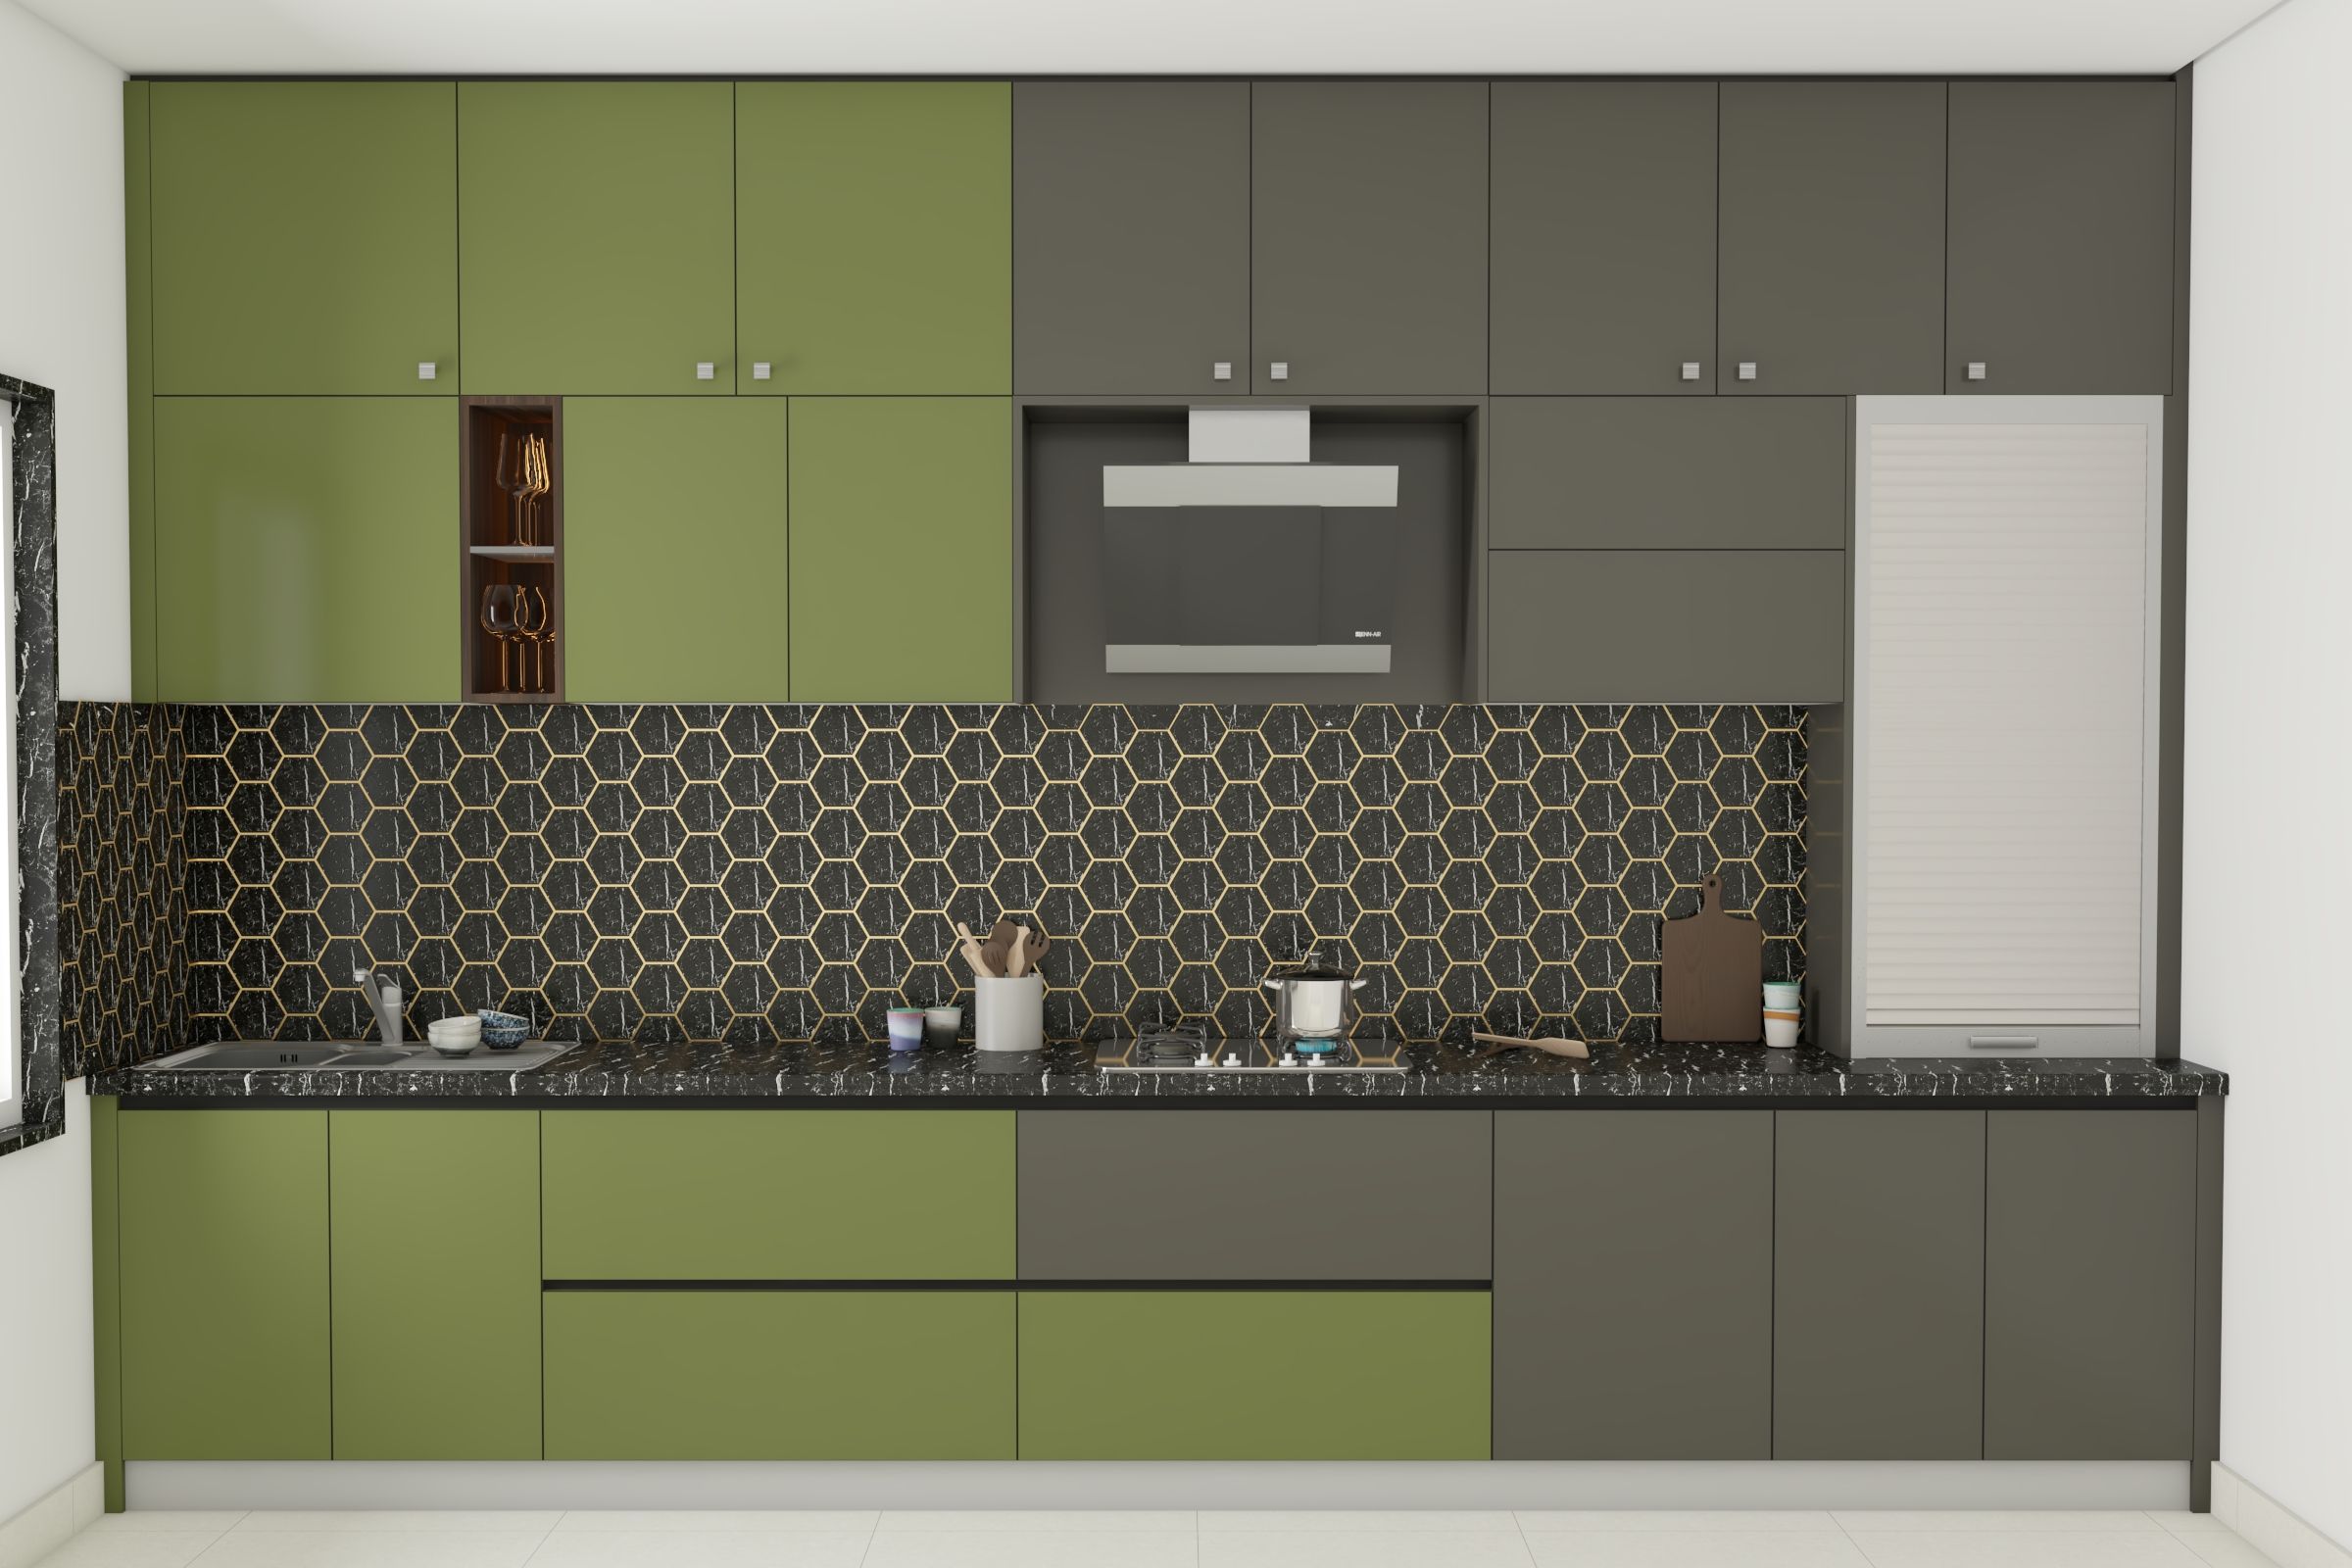 Dual Tone Straight Contemporary Kitchen Design In Golf Green And Gothic Grey